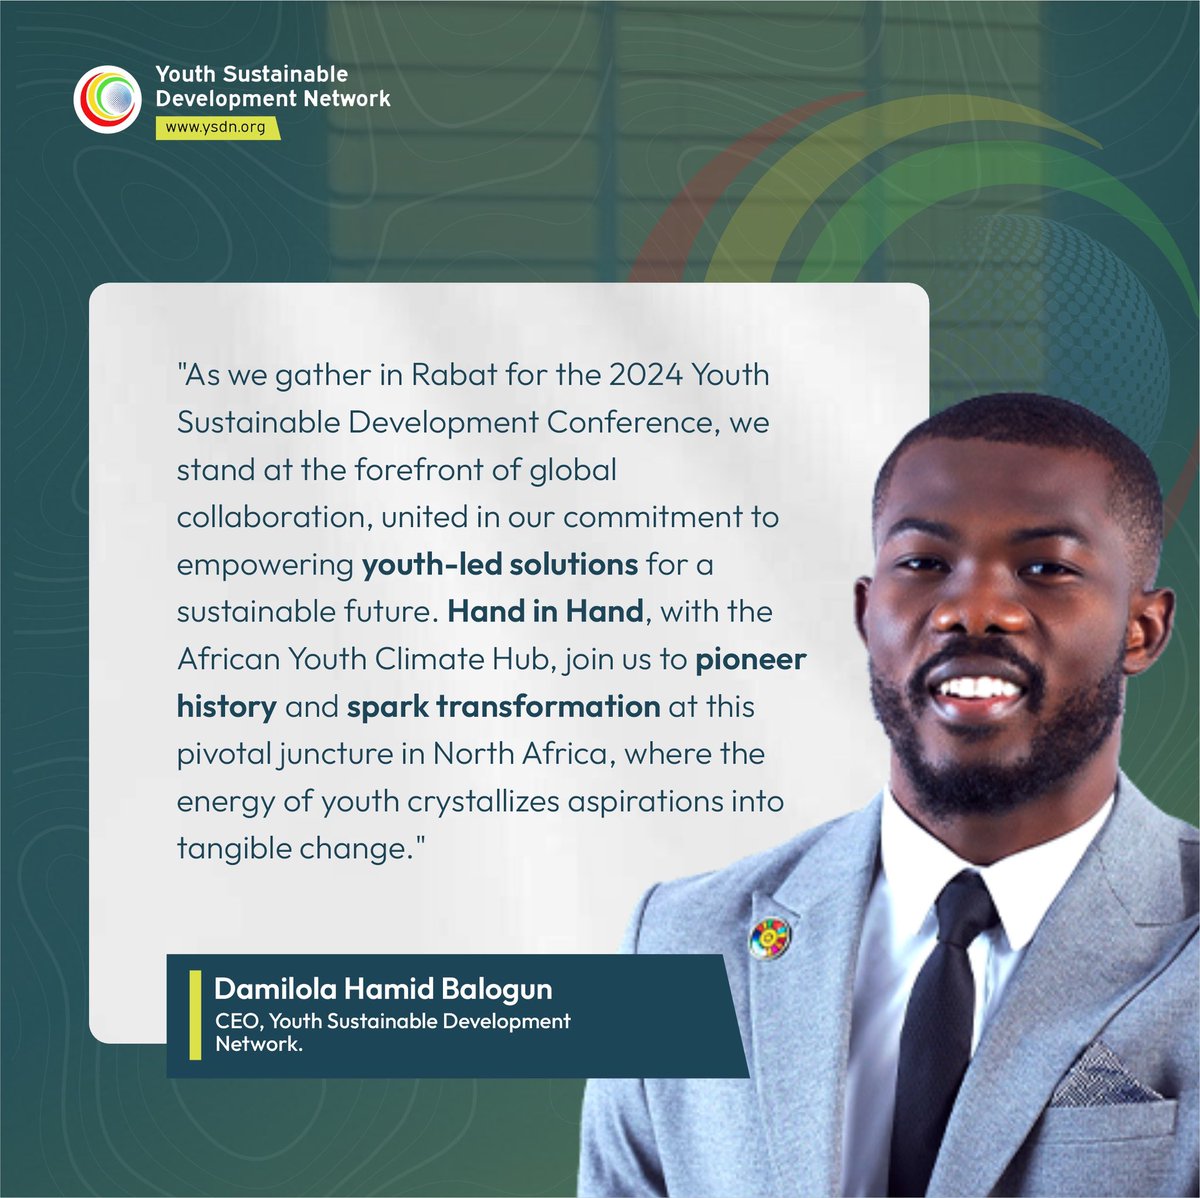 Together with the African Youth Climate Hub, we look forward to welcoming you for the Youth Sustainable Development Conference 2024 in Rabat, Morocco🇲🇦 Discover more about this year’s conference: ysdn.org/events/youth-s… #YSDC2024